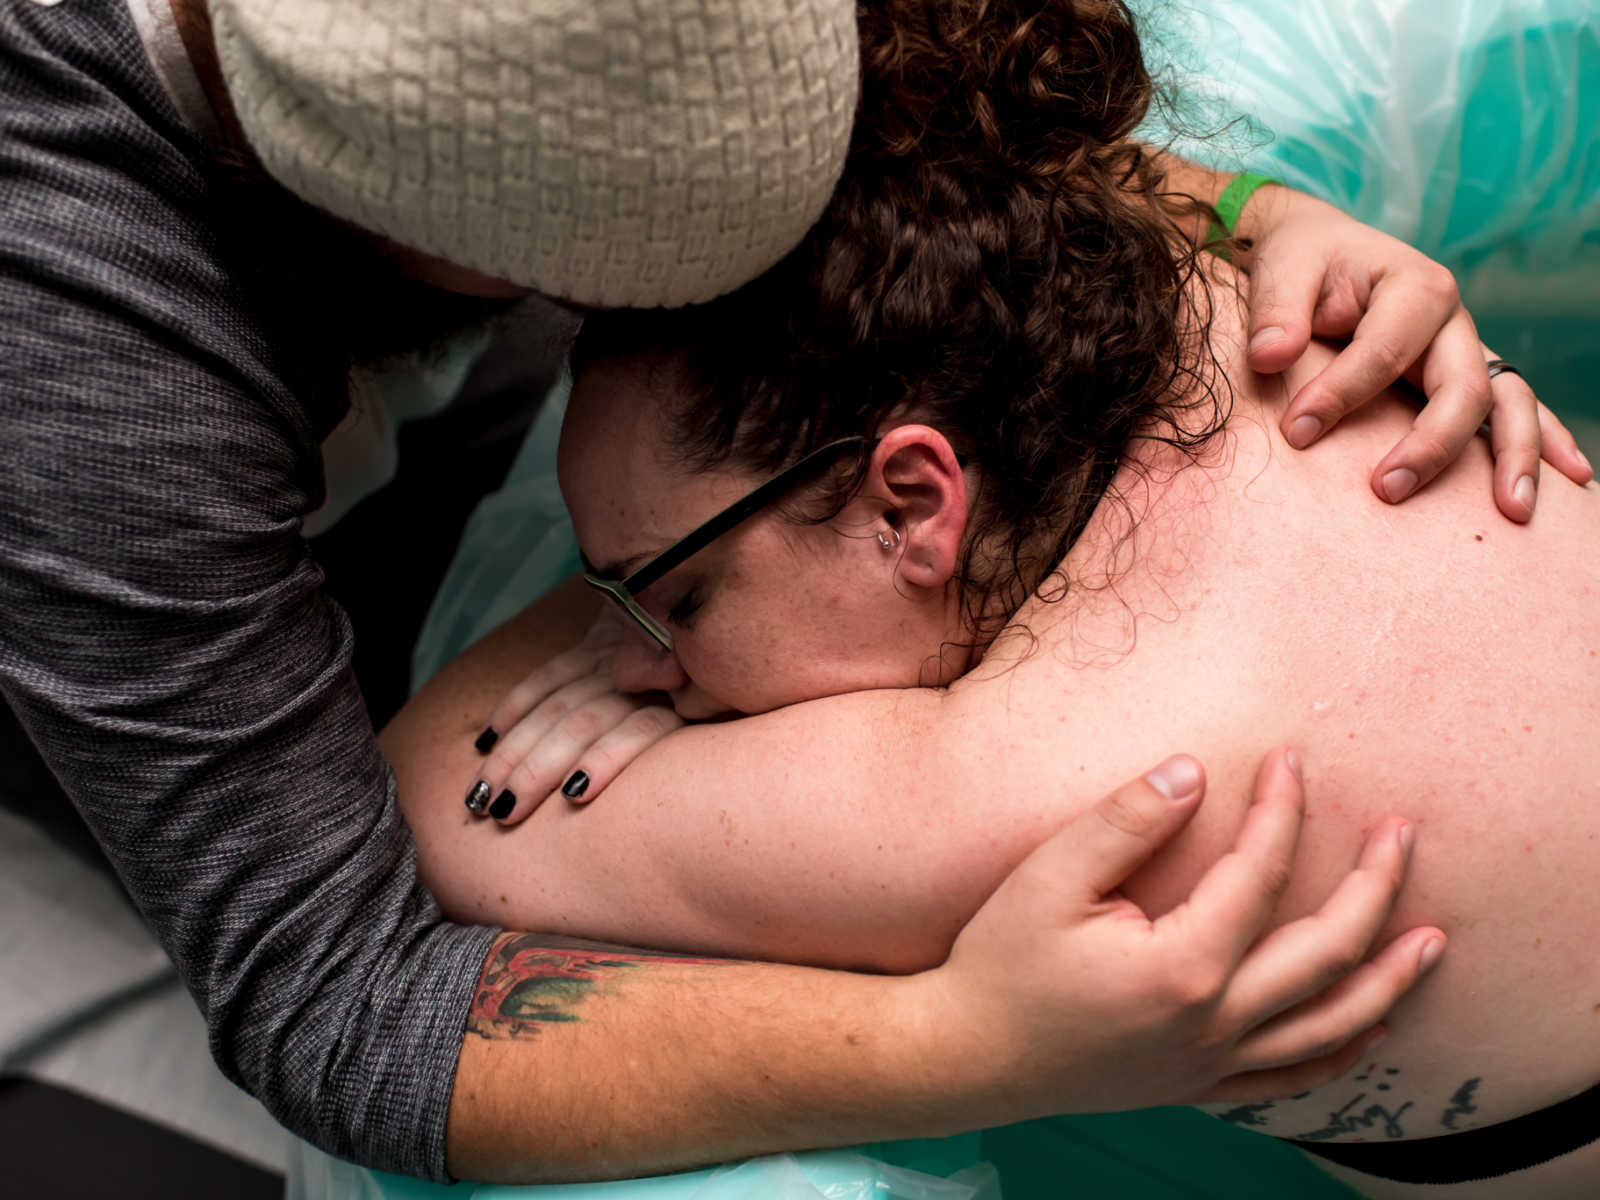 Pregnant woman leaning over side of birthing pool in pain being held by husband